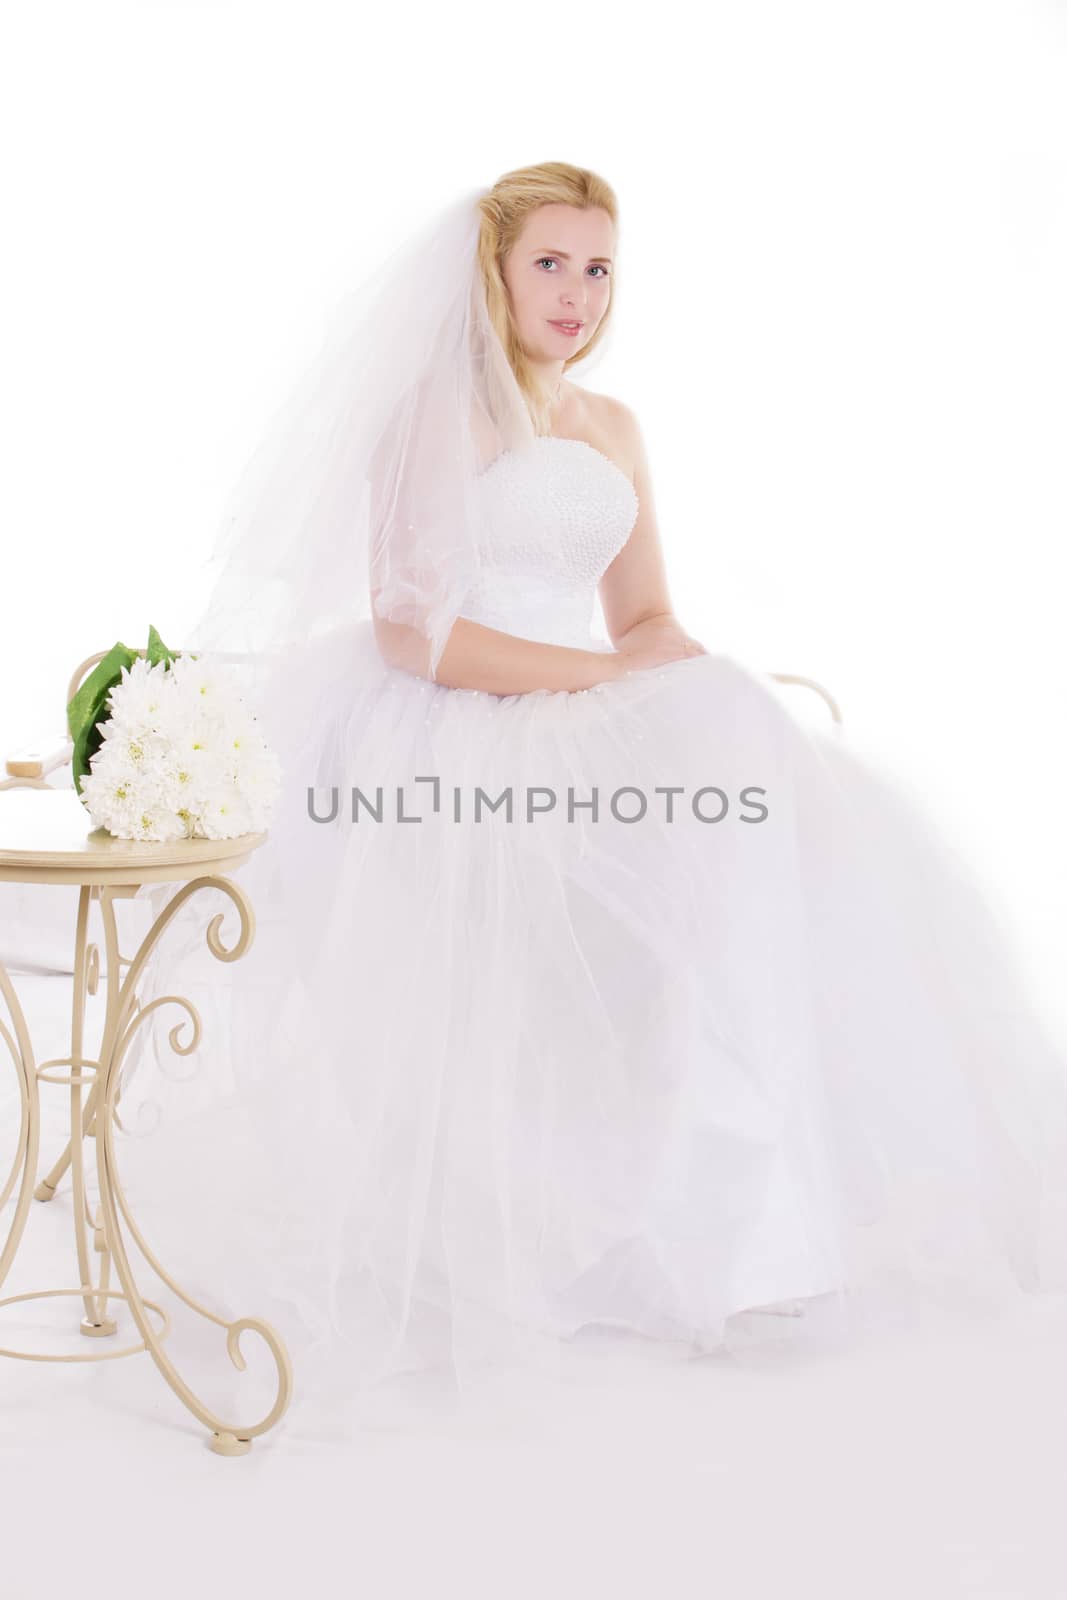 Blonde bride sitting with bouquet by Angel_a